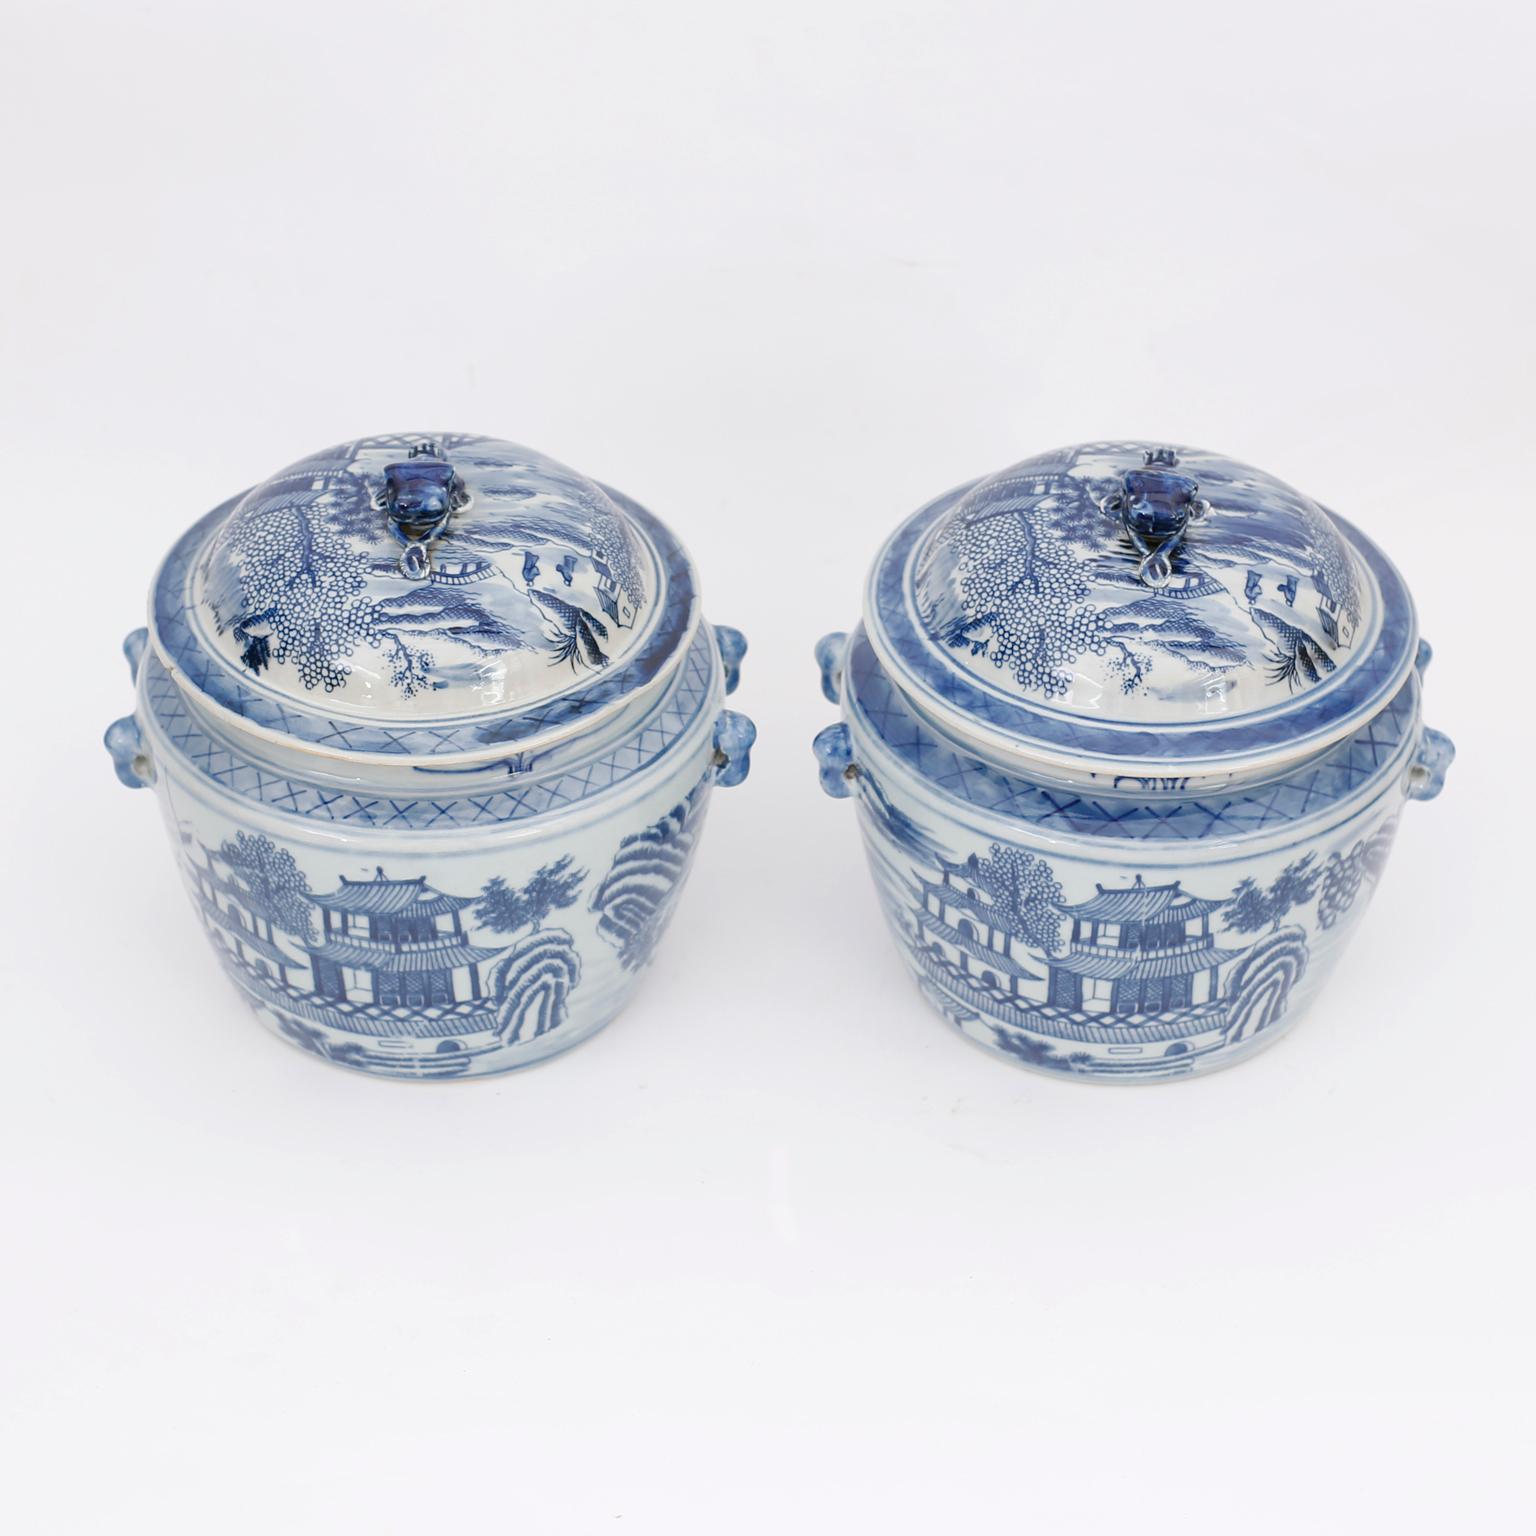 Pair of Chinese blue and white porcelain lidded pots with cat handles, hand decorated all around with pagoda motifs on the front and back.